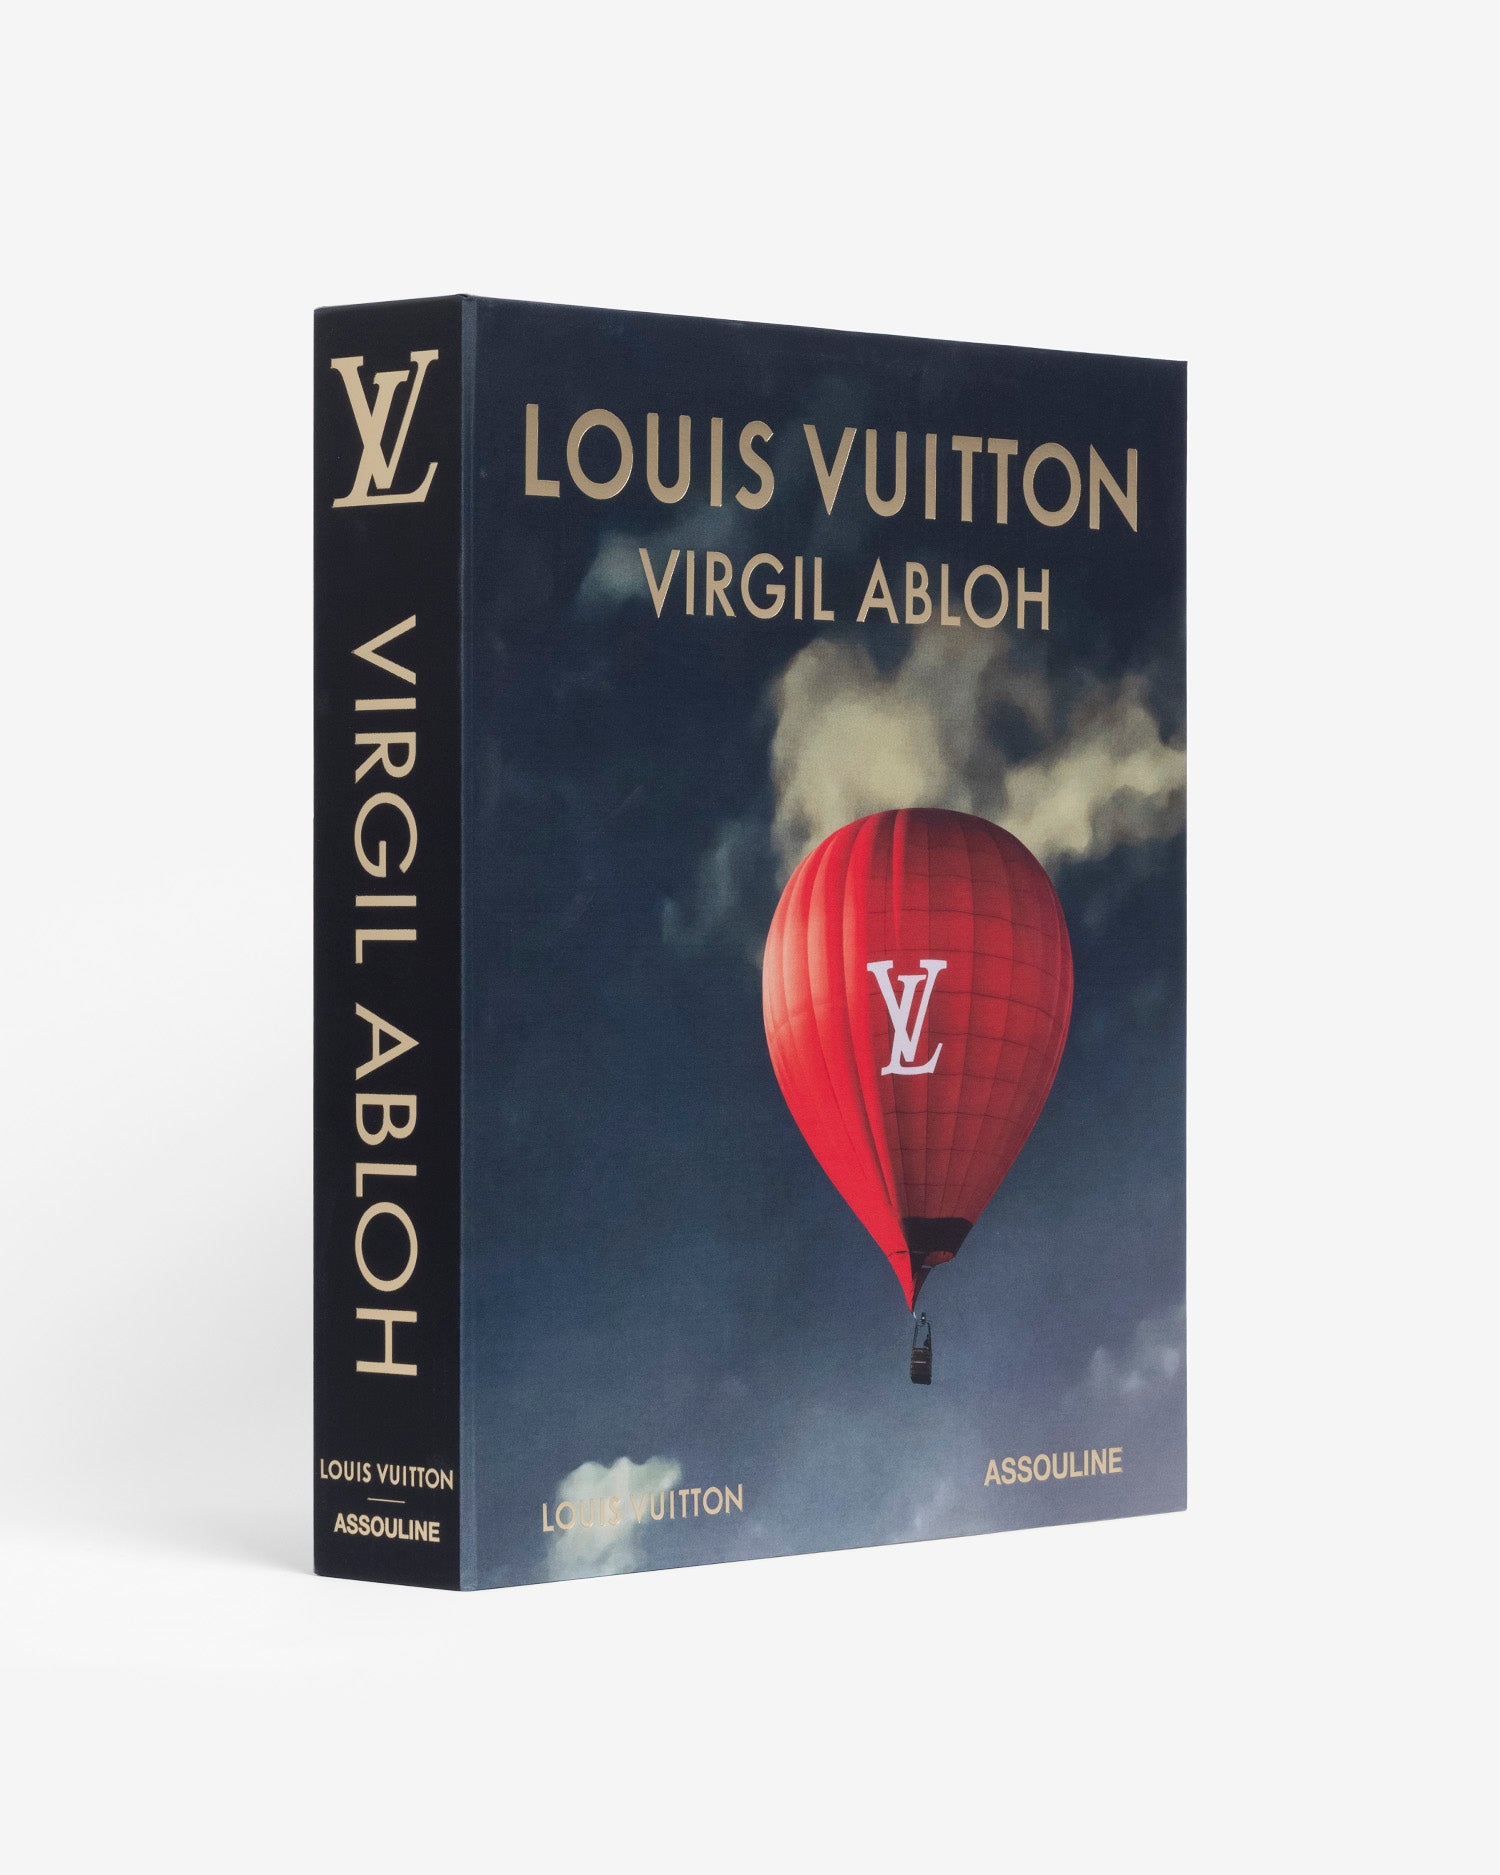 Louis Vuitton: Virgil Abloh (Ultimate Edition) by Anders Christian ...